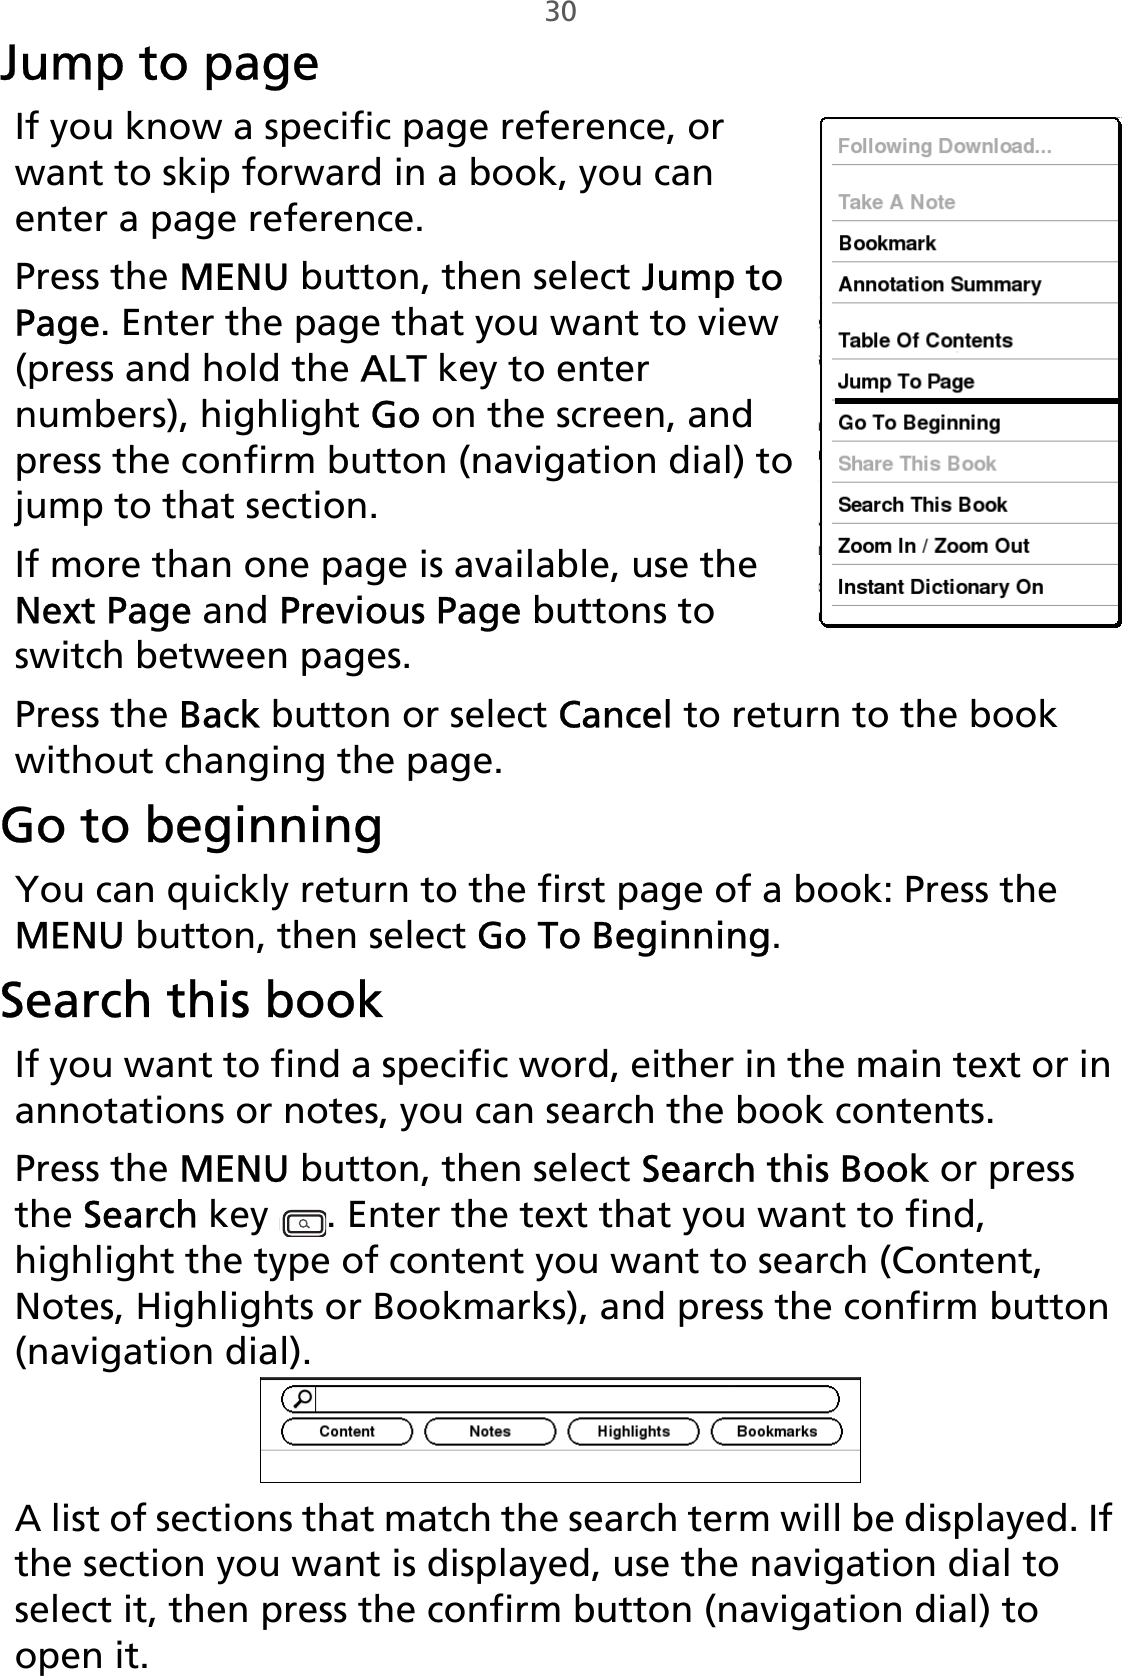 30Jump to pageIf you know a specific page reference, or want to skip forward in a book, you can enter a page reference.Press the MENU button, then select Jump to Page. Enter the page that you want to view (press and hold the ALT key to enter numbers), highlight Go on the screen, and press the confirm button (navigation dial) to jump to that section. If more than one page is available, use the Next Page and Previous Page buttons to switch between pages.Press the Back button or select Cancel to return to the book without changing the page.Go to beginningYou can quickly return to the first page of a book: Press the MENU button, then select Go To Beginning. Search this bookIf you want to find a specific word, either in the main text or in annotations or notes, you can search the book contents.Press the MENU button, then select Search this Book or press the Search key  . Enter the text that you want to find, highlight the type of content you want to search (Content, Notes, Highlights or Bookmarks), and press the confirm button (navigation dial). A list of sections that match the search term will be displayed. If the section you want is displayed, use the navigation dial to select it, then press the confirm button (navigation dial) to open it.